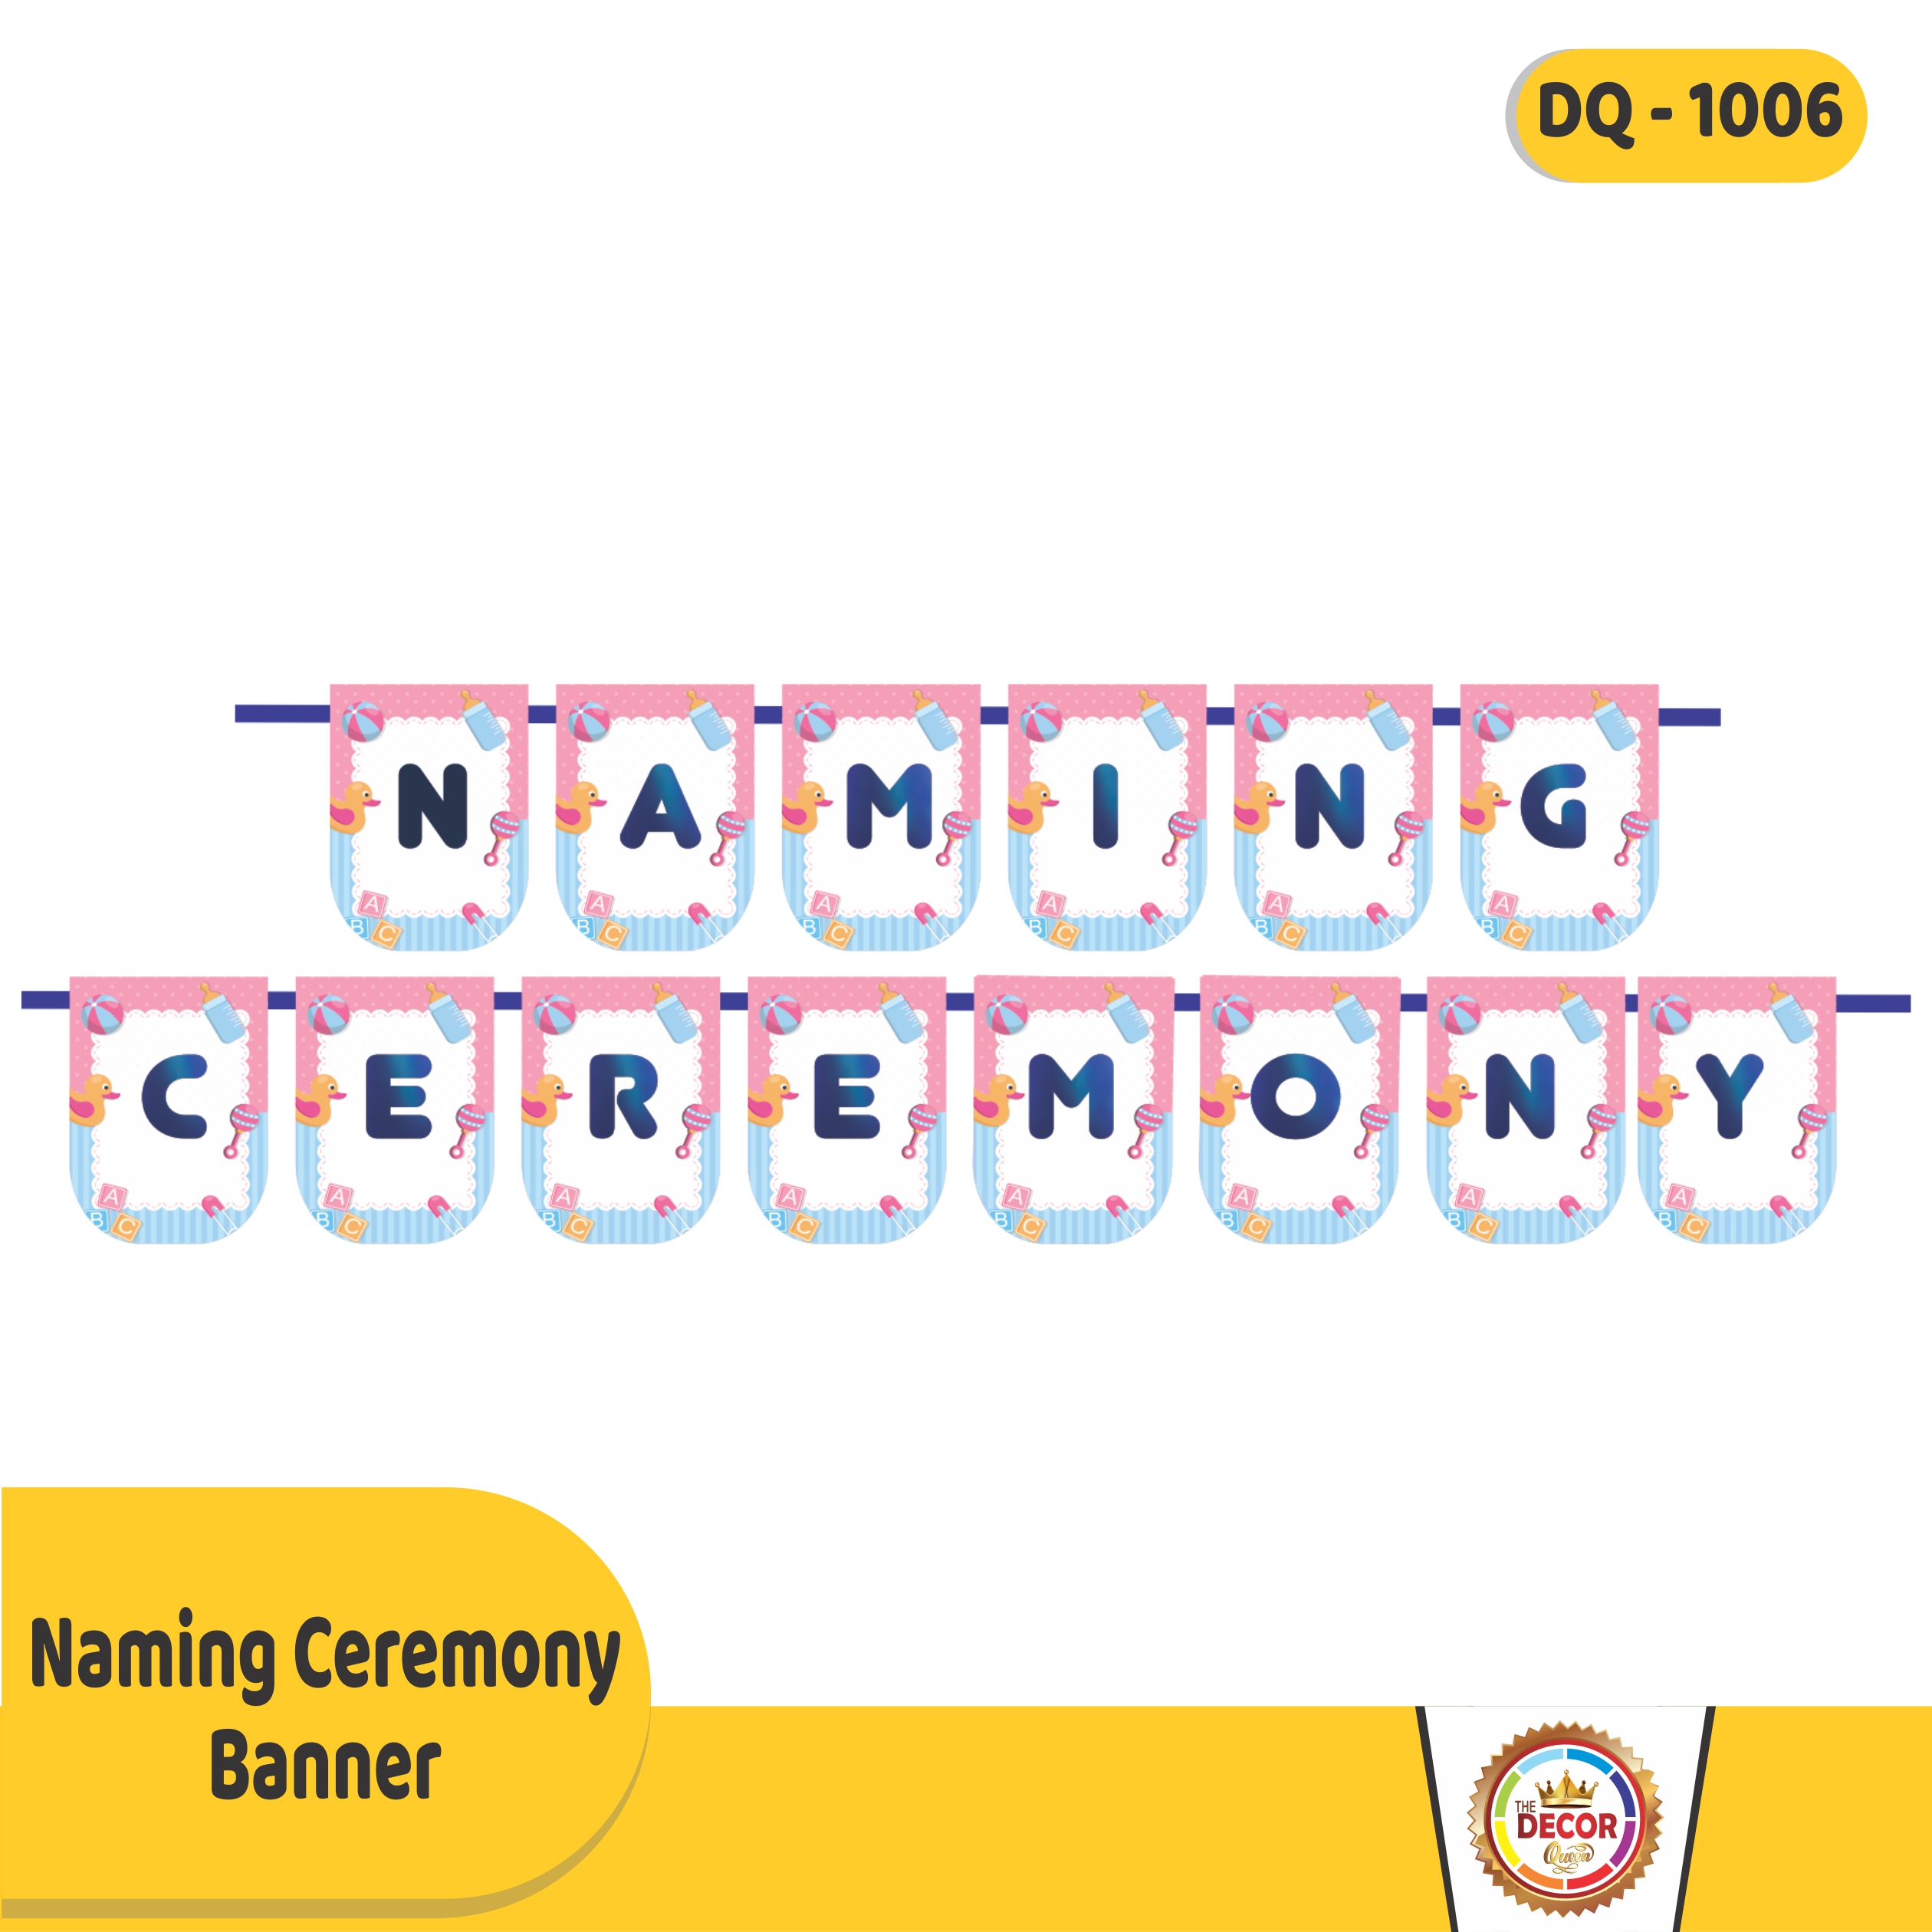 Naming Ceremony  Banner|Banners|Other Banners